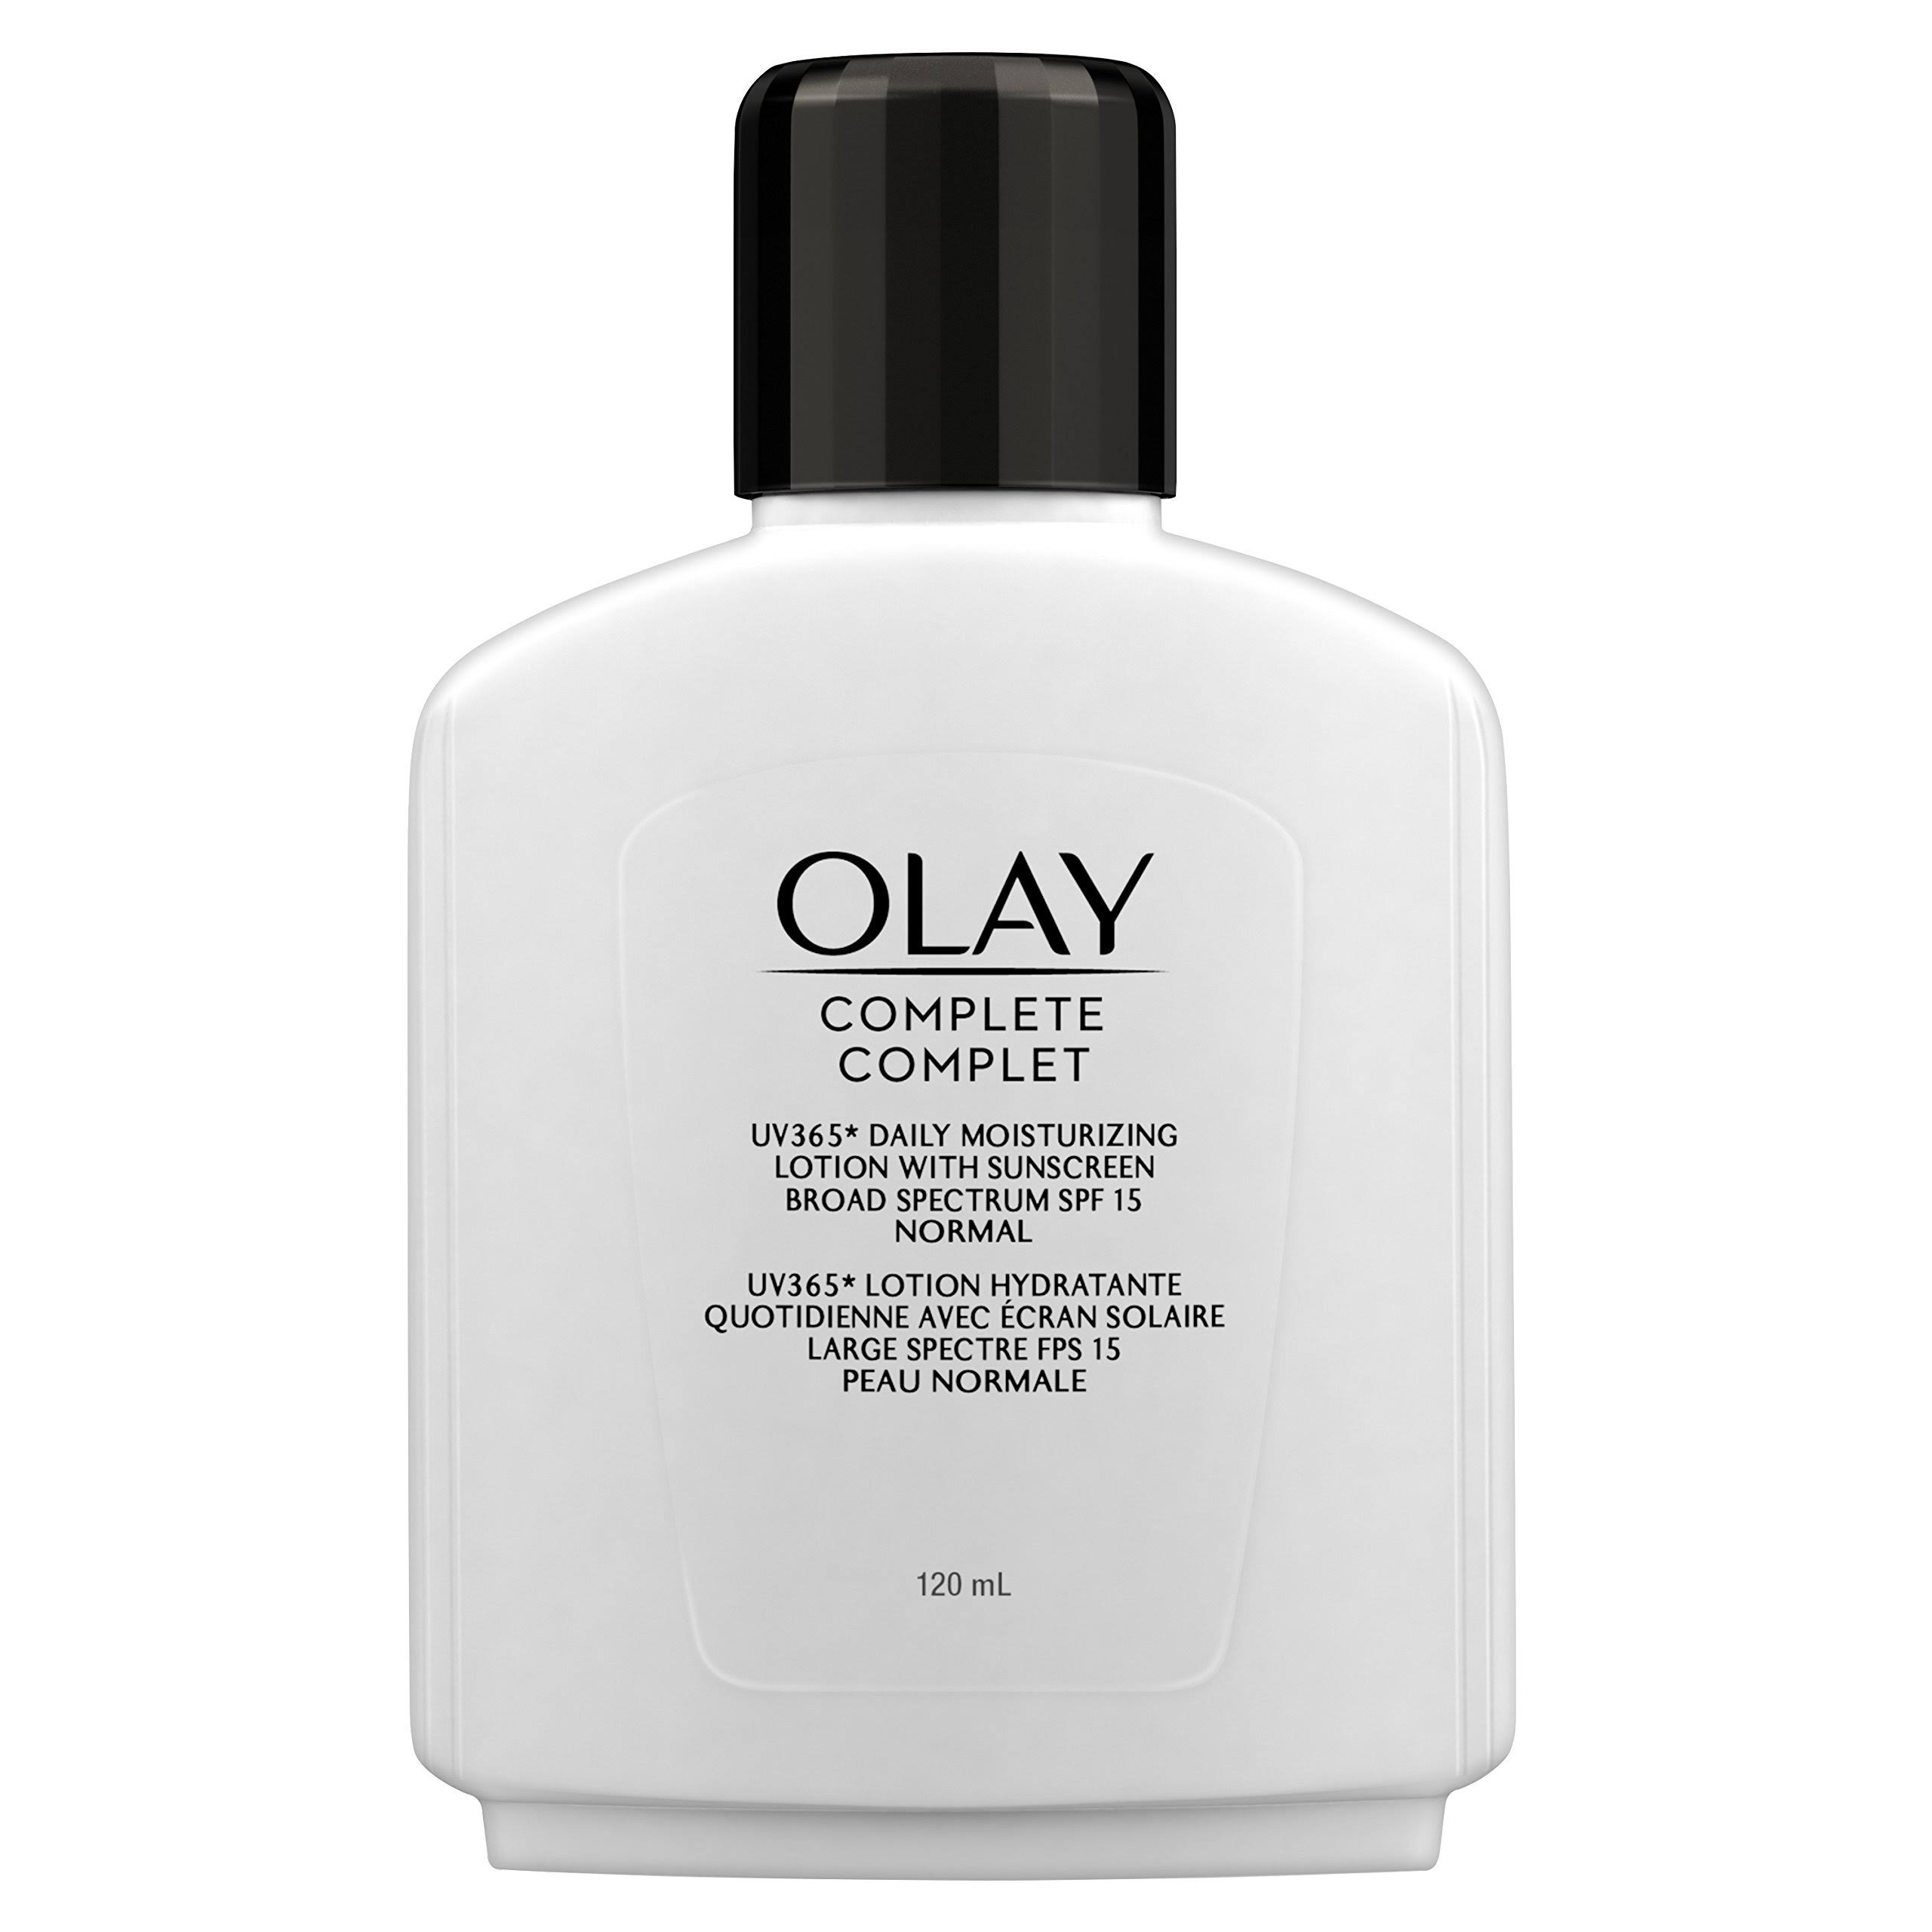 Olay Complete Lotion Moisturizer With Spf 15 Normal 120